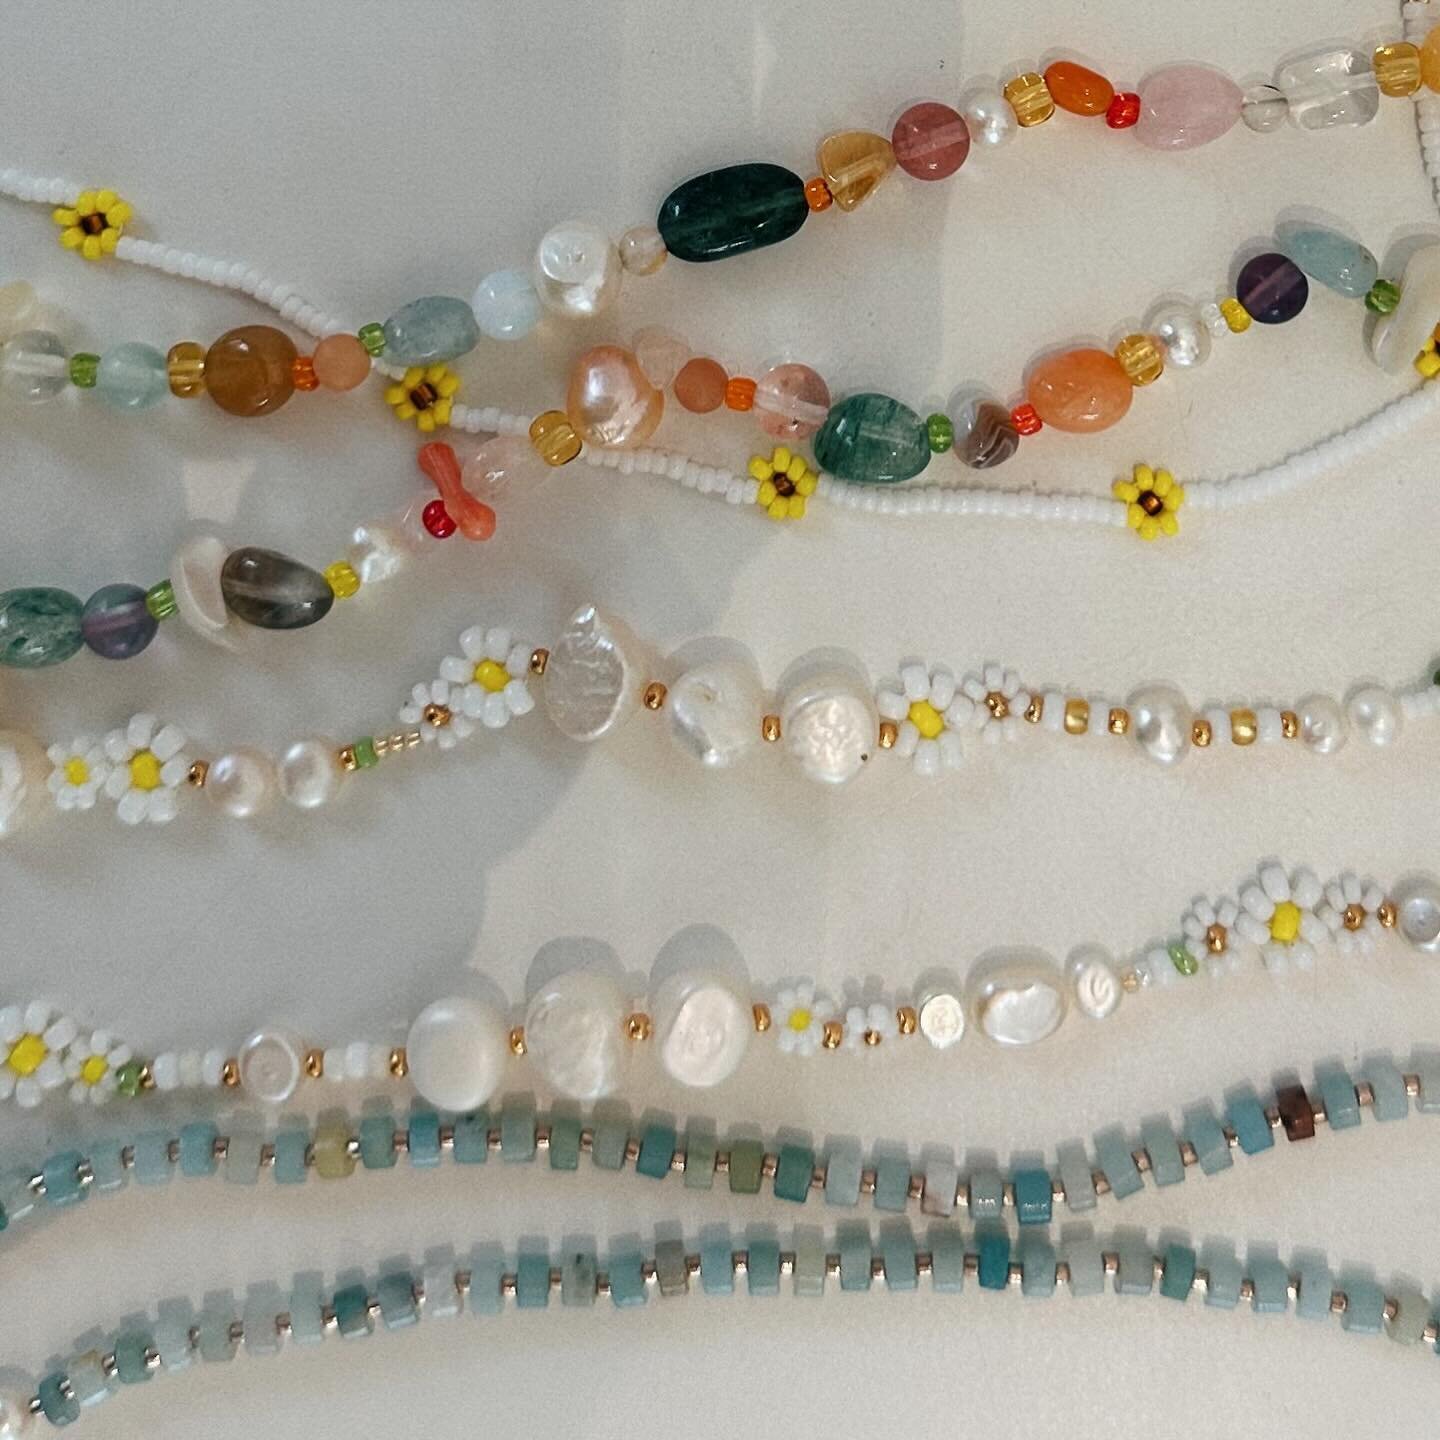 Packing for vacay has never been so easy 🌴🌞

.
.
.

#necklaces #beads #handmade #summer #nineties #fun #beach #noosa #bondi #byron #jewellery #accessories #pearls #summer